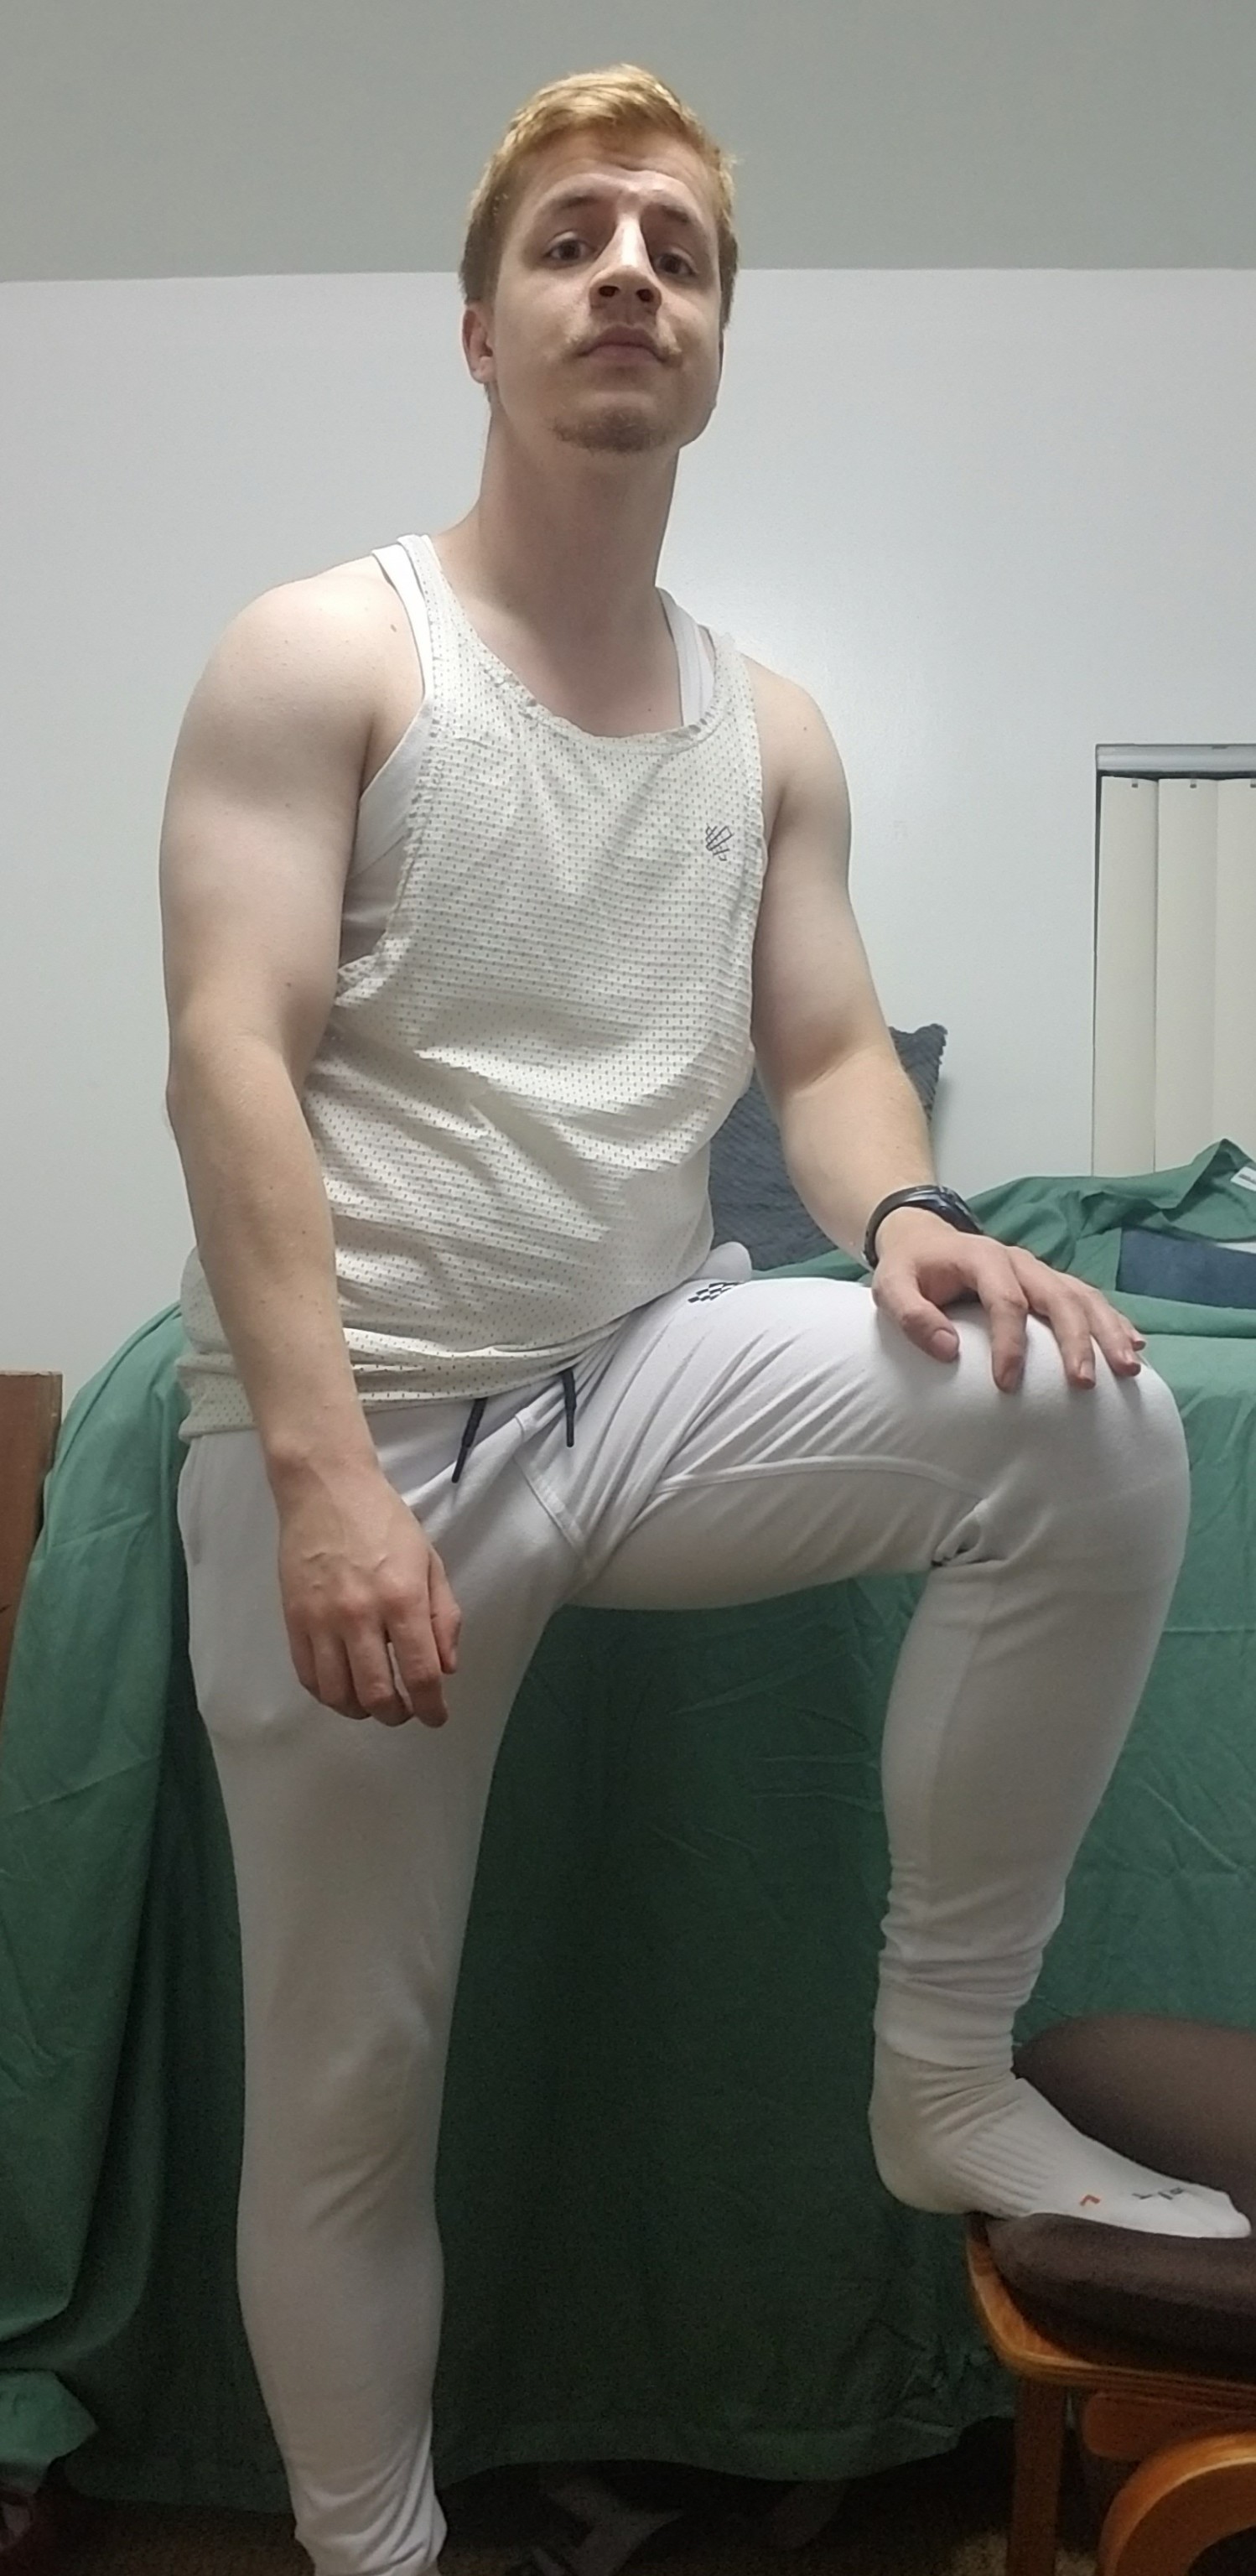 granpuff:Choose your characterI wore all white to the gym for no reason. There are, as a matter of fact, a few more pics with less clothes, but those aren’t for everyone ;)Bonus, feelin a lil cheeky